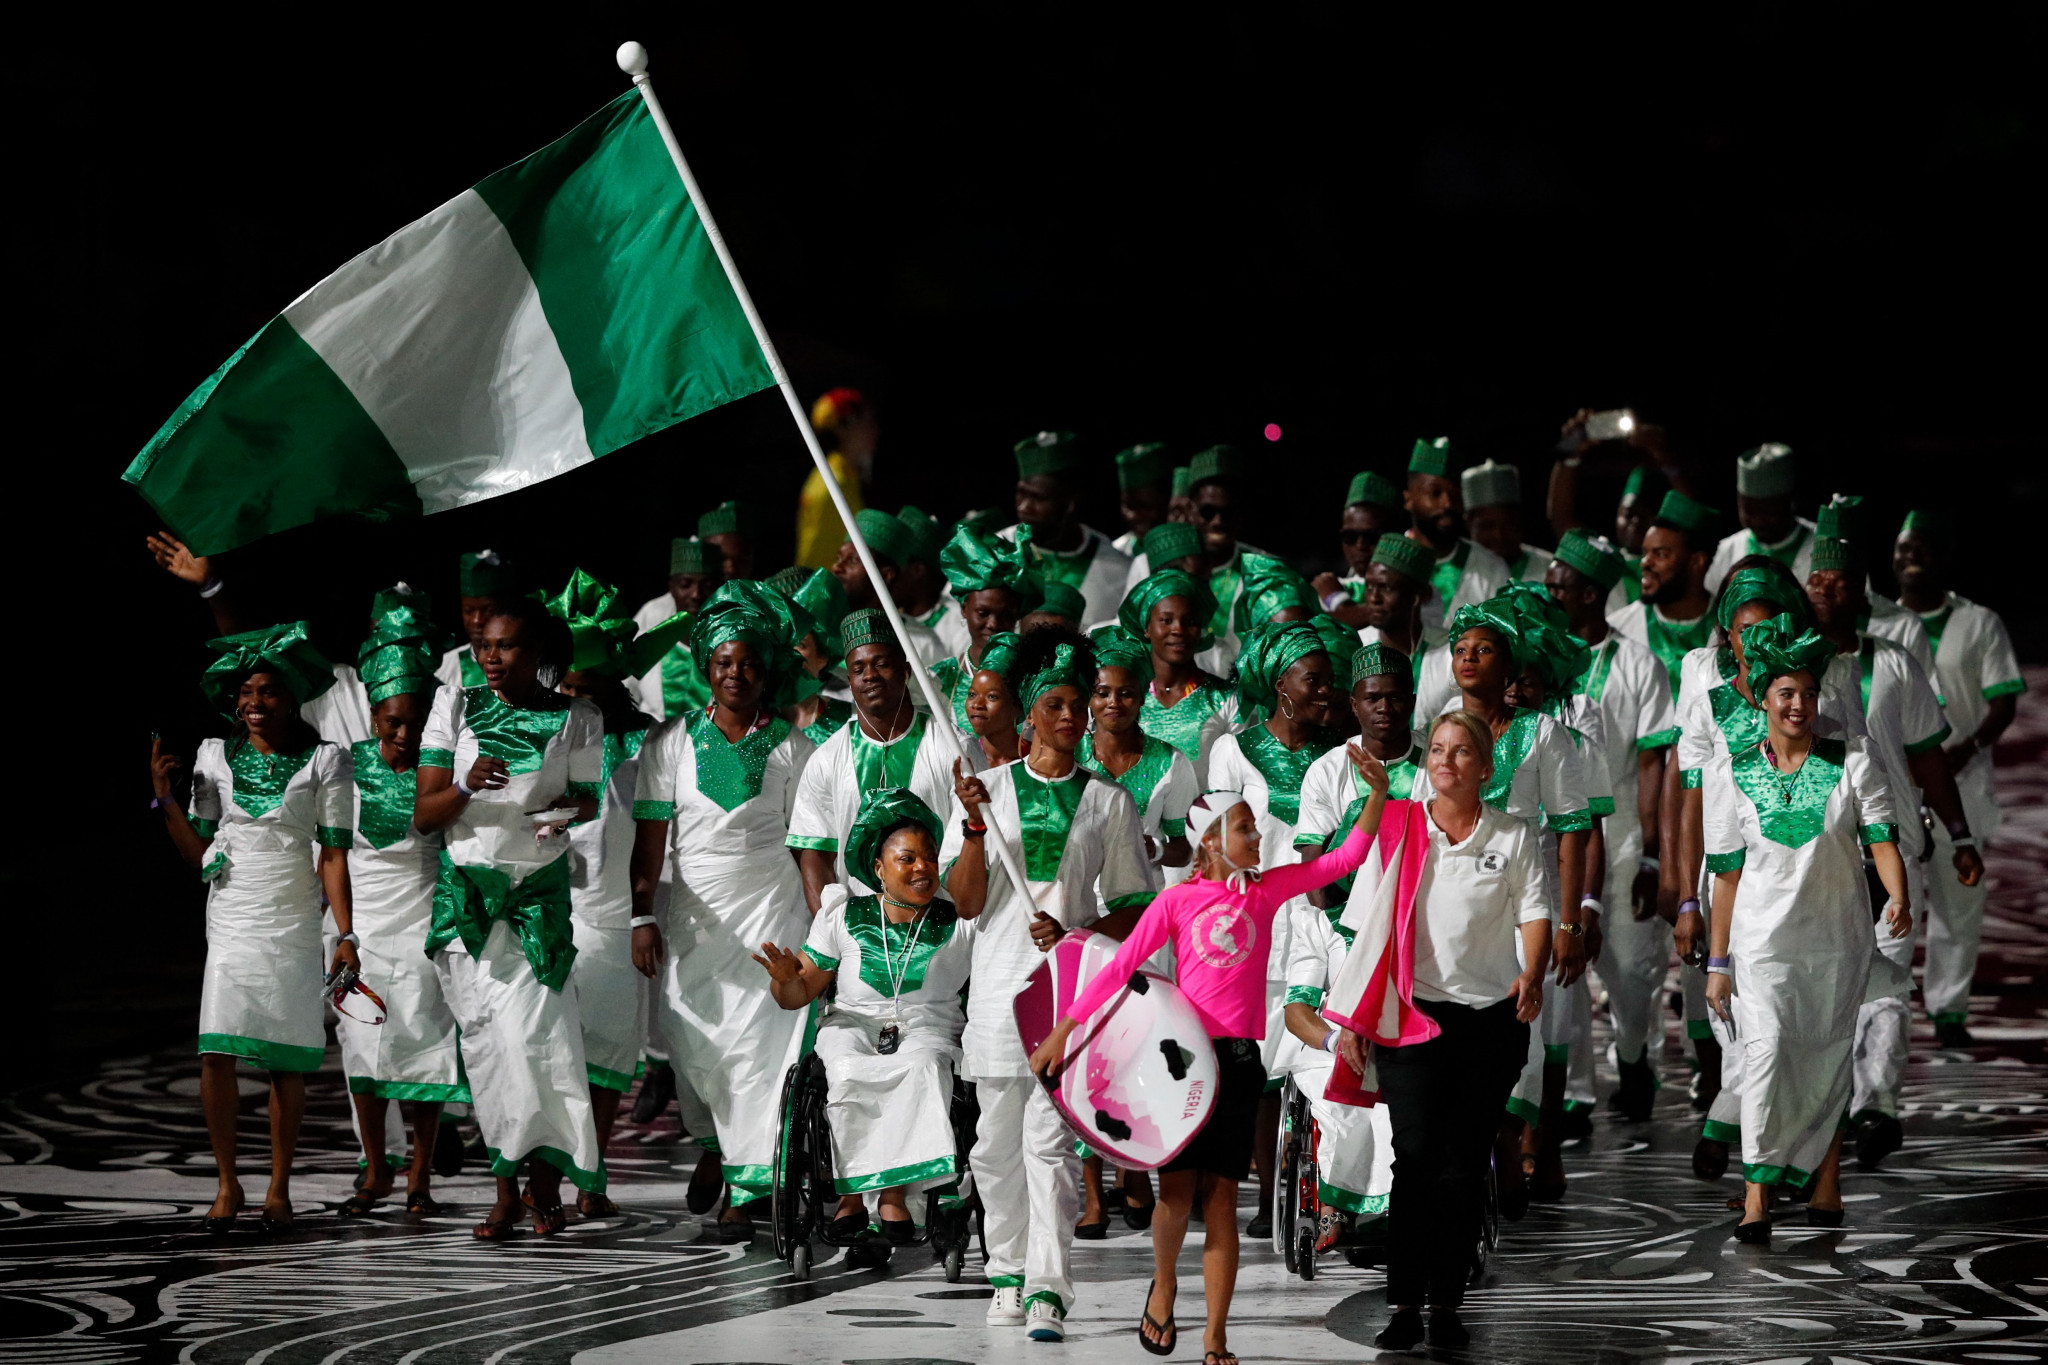 All Nigerian athletes are set to be drugs tested prior to Birmingham 2022, the country's Government has ordered, to ensure there is no repeat of the Tokyo 2020 scandal ©Getty Images